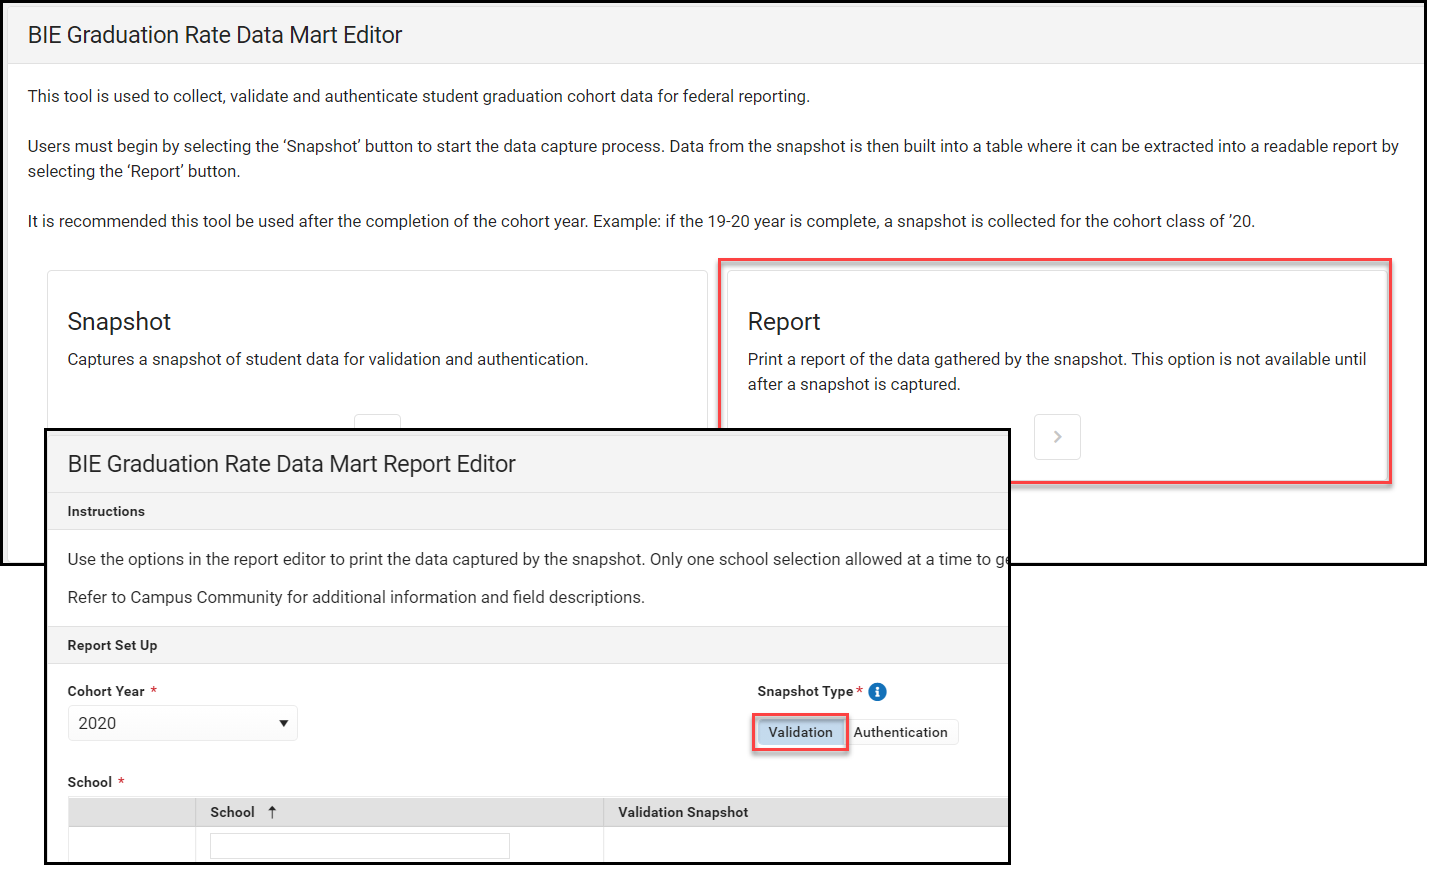 Screenshot of the Graduation Rate Data Mart Report Editor with Validation type highlighted